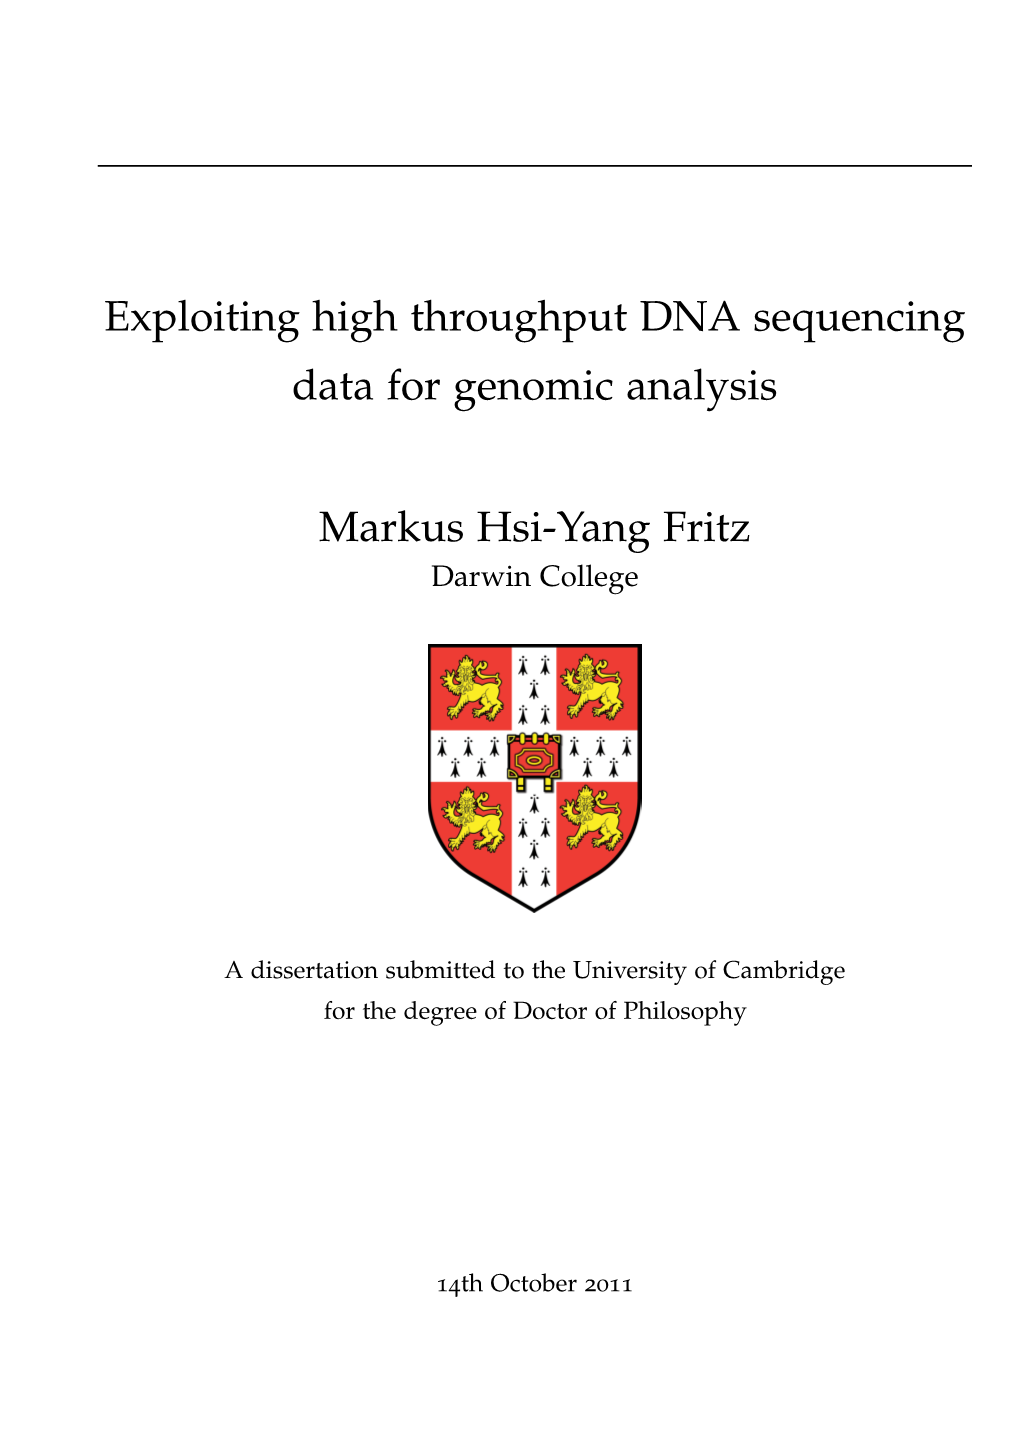 Exploiting High Throughput DNA Sequencing Data for Genomic Analysis